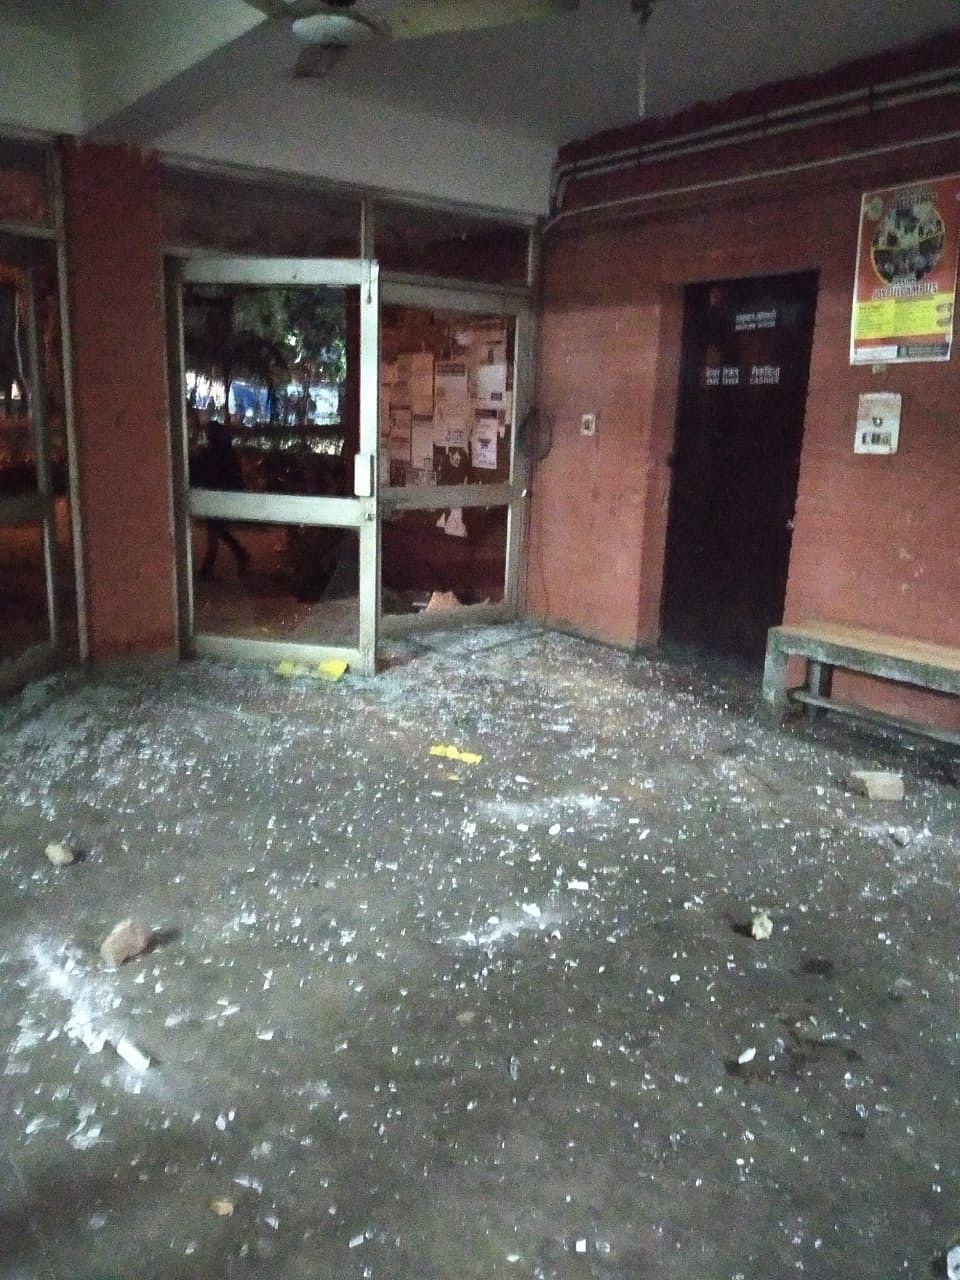 The Akhil Bharatiya Vidyarthi Parishad (ABVP) alleged that its members were "brutally" attacked by students affiliated to Left student organisations SFI, AISA and the DSF. Photo/PTI (@abvpjnu)